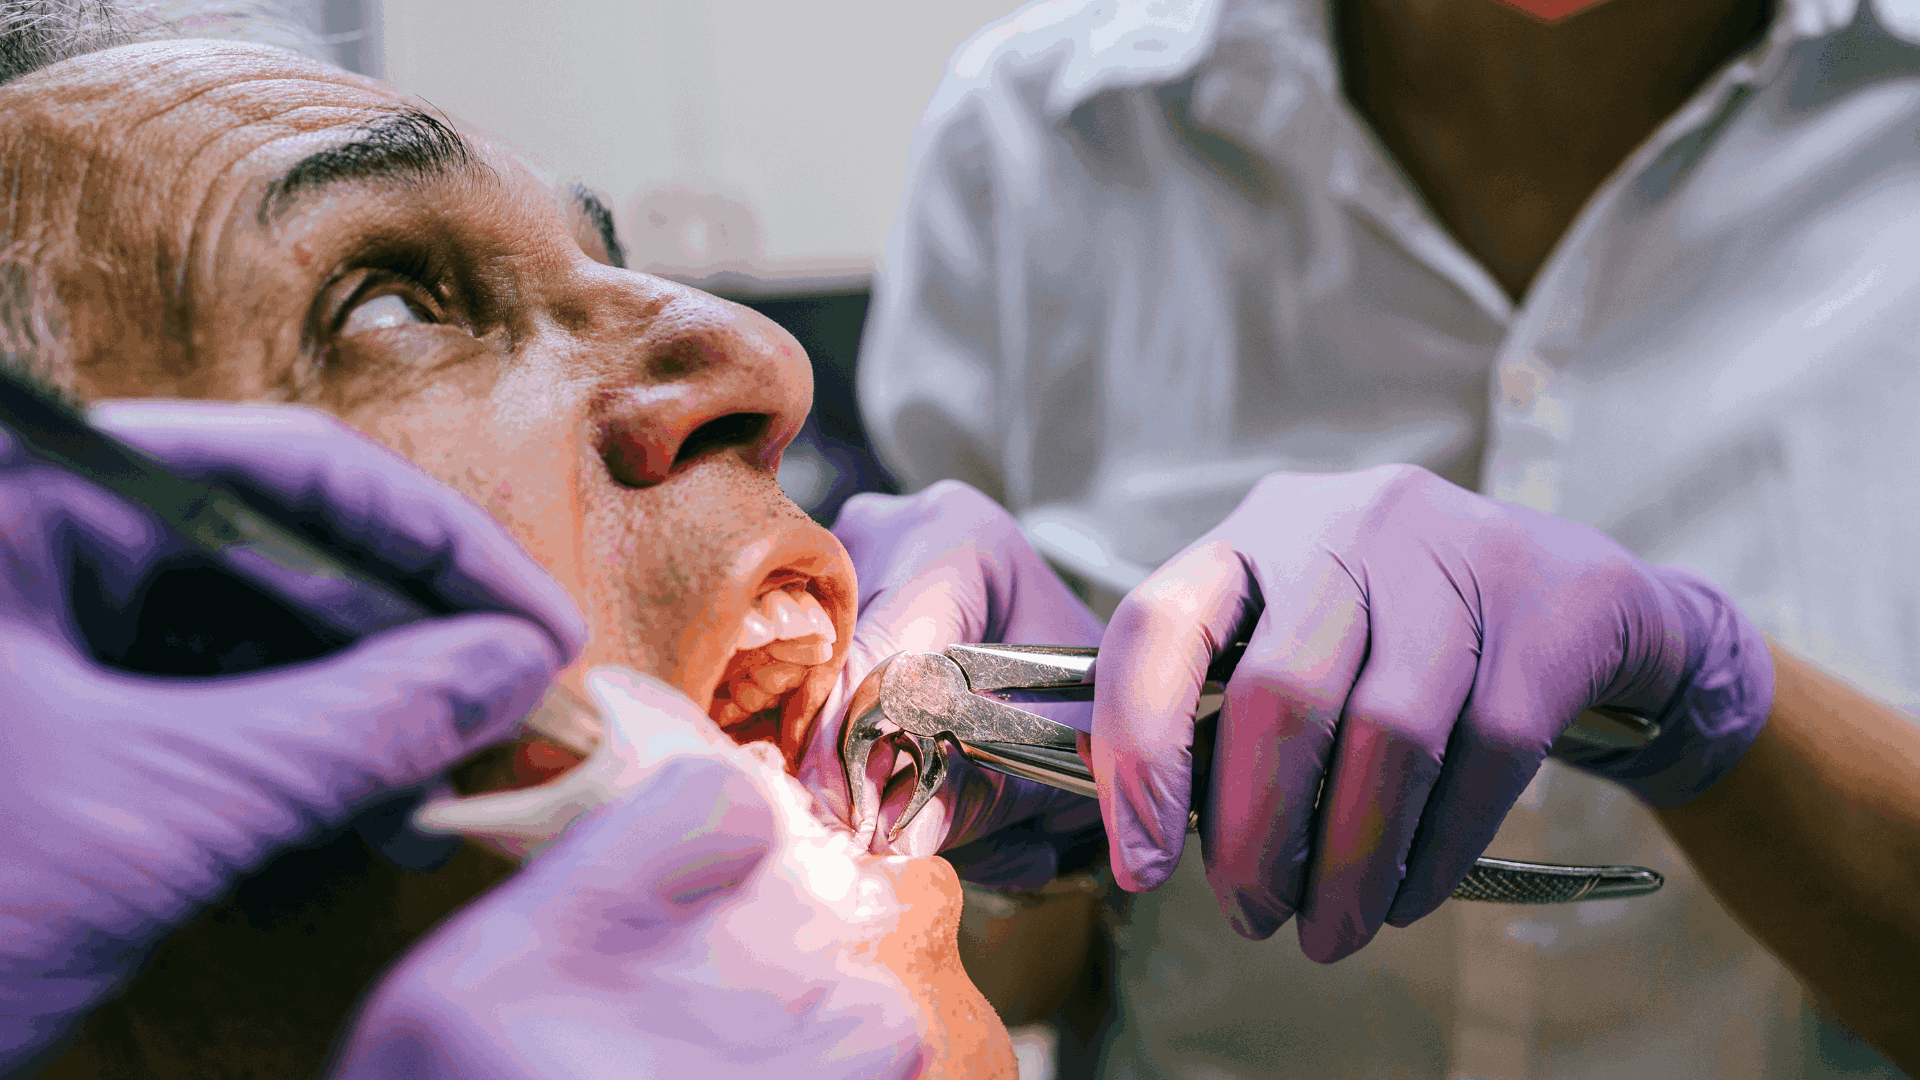 how painful is tooth extraction without anesthesia